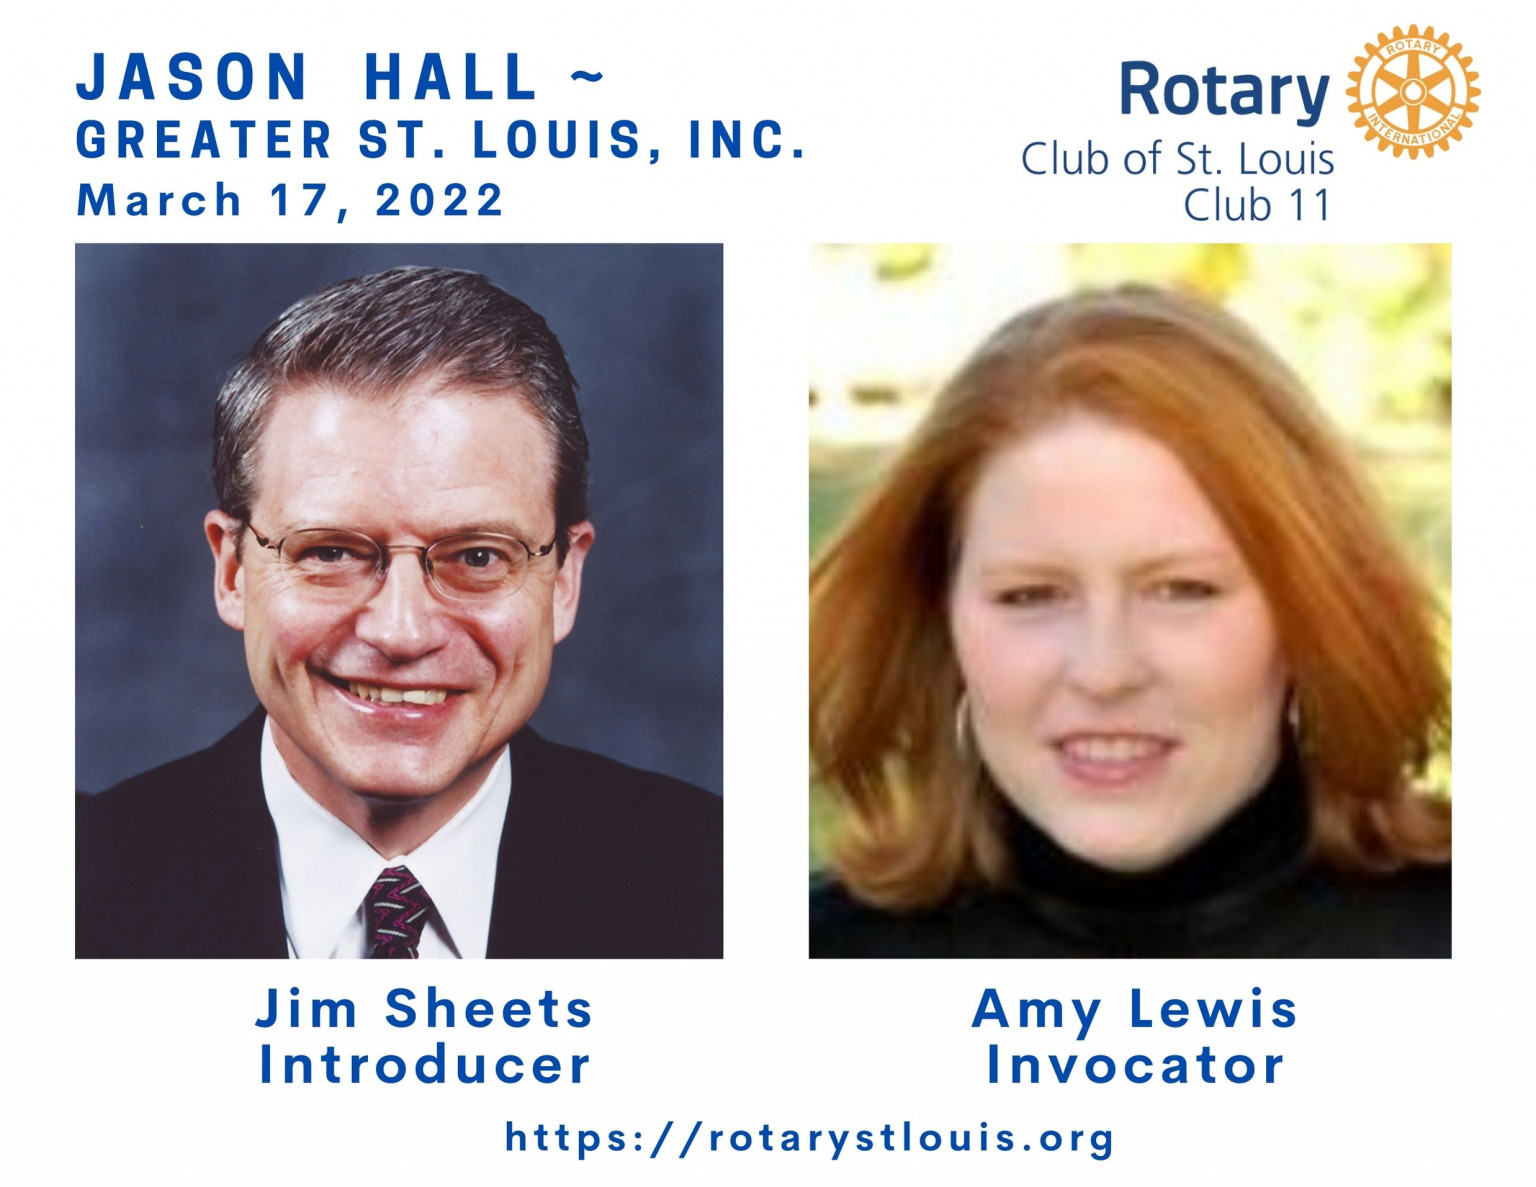 Jim Sheets, Introducer and Amy Lewis, Invocator - March 17, 2022 at St. Louis Rotary Club Lunch